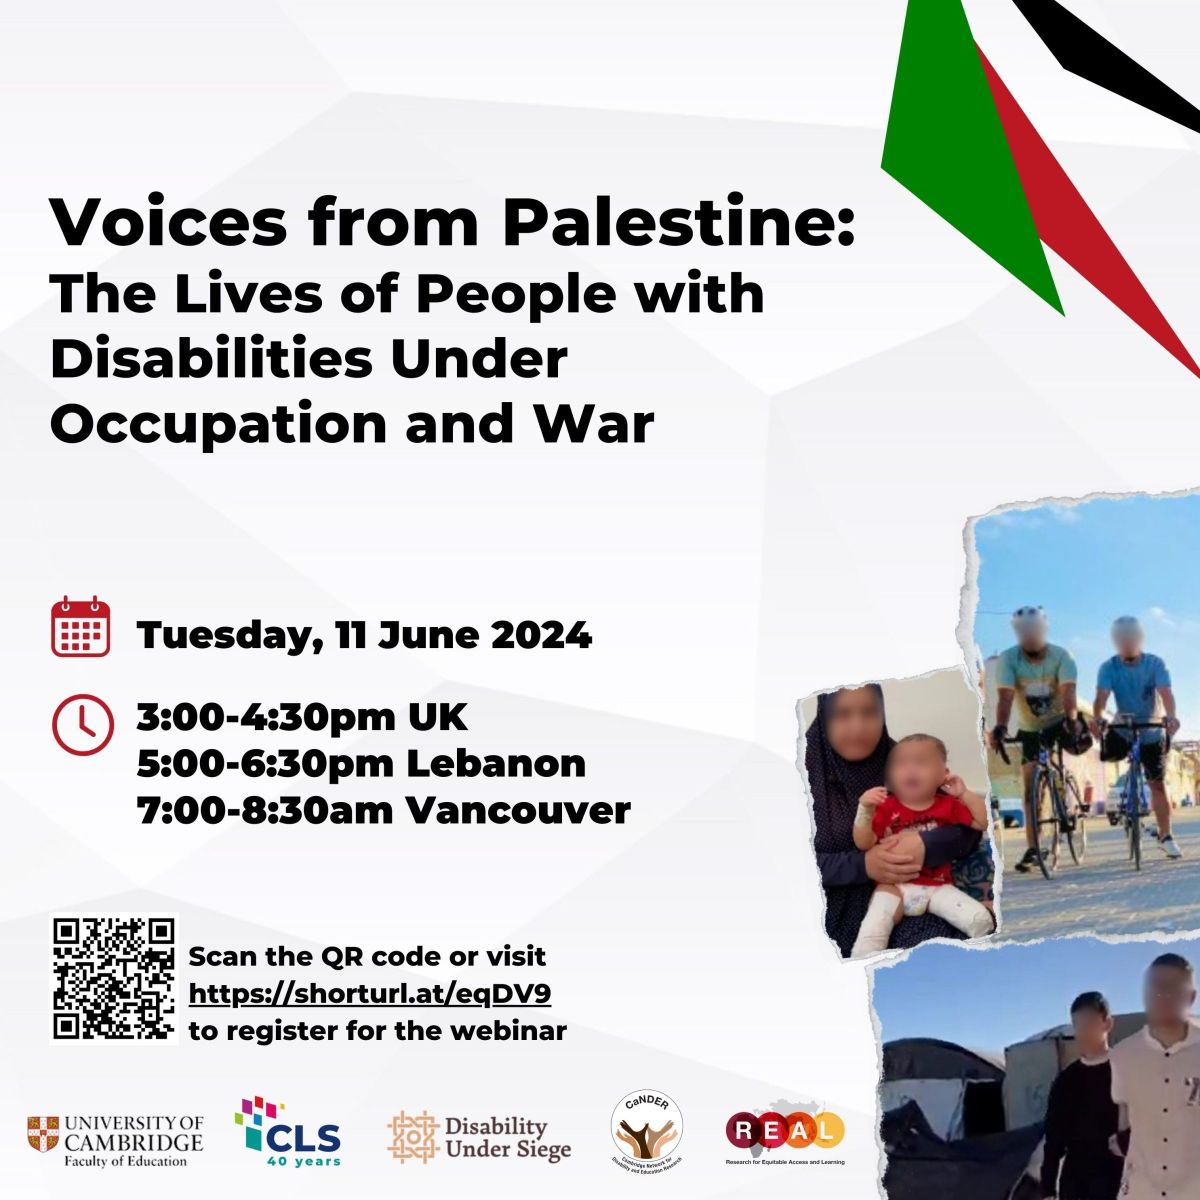 We are co-hosting an event with @LebaneseStudies @REAL_Centre & @CaNDER_Research centring the lived experience of people with disabilities in #Palestine of living under occupation and war. Join us on 11th September at 3pm UK time - register here: shorturl.at/eqDV9